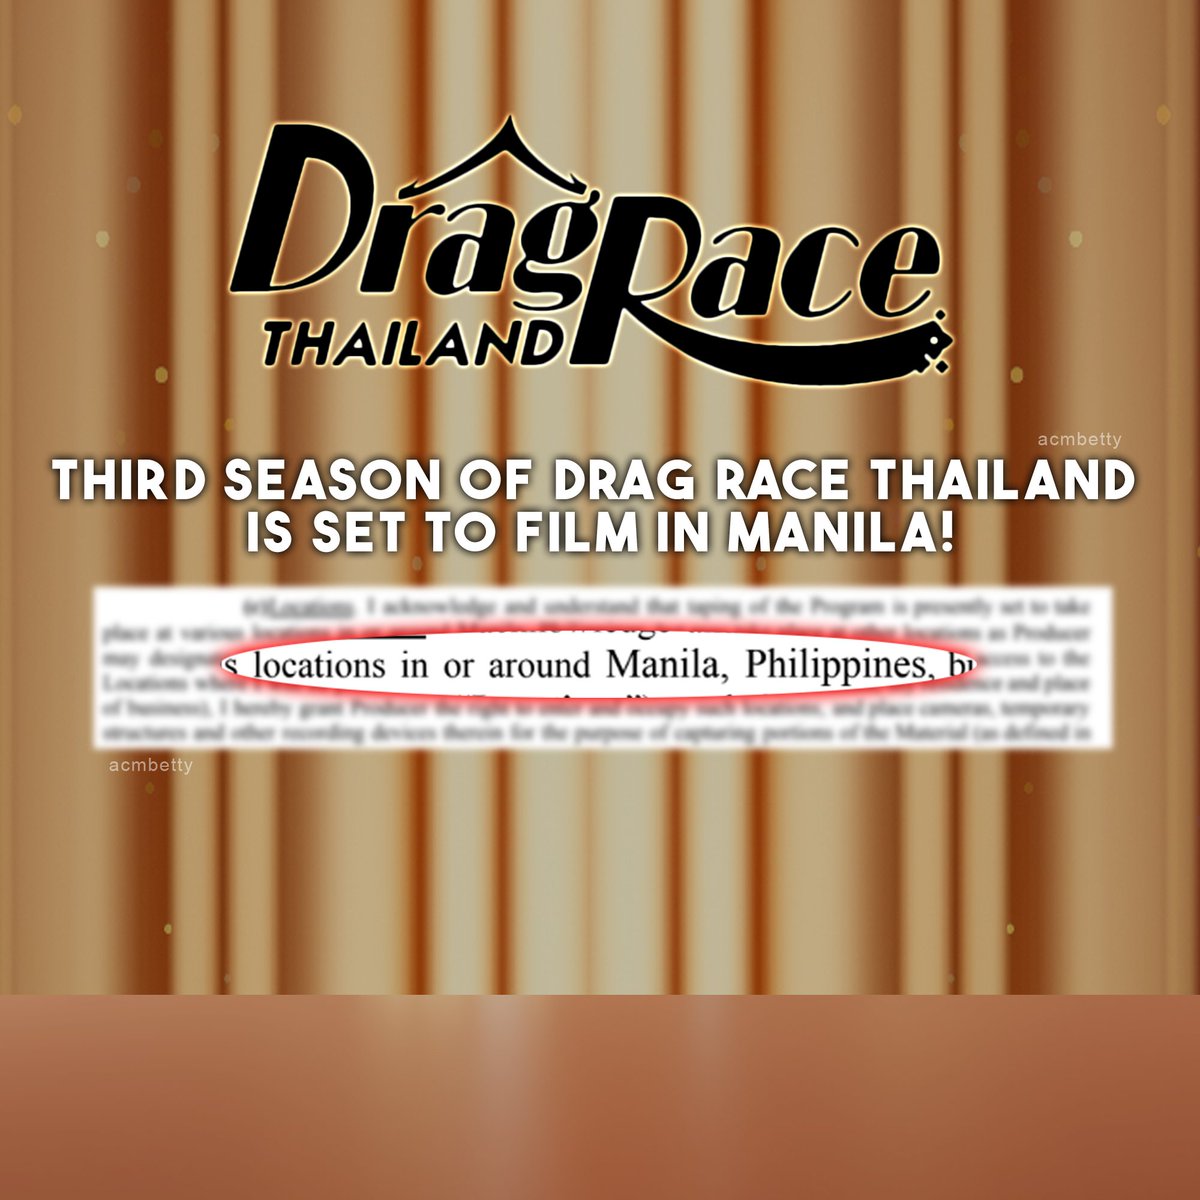 BREAKING: The long-awaited comeback season of #DragRaceThailand is set to film in Manila, Philippines! It is a collaboration of the Thailand and Philippines' production.